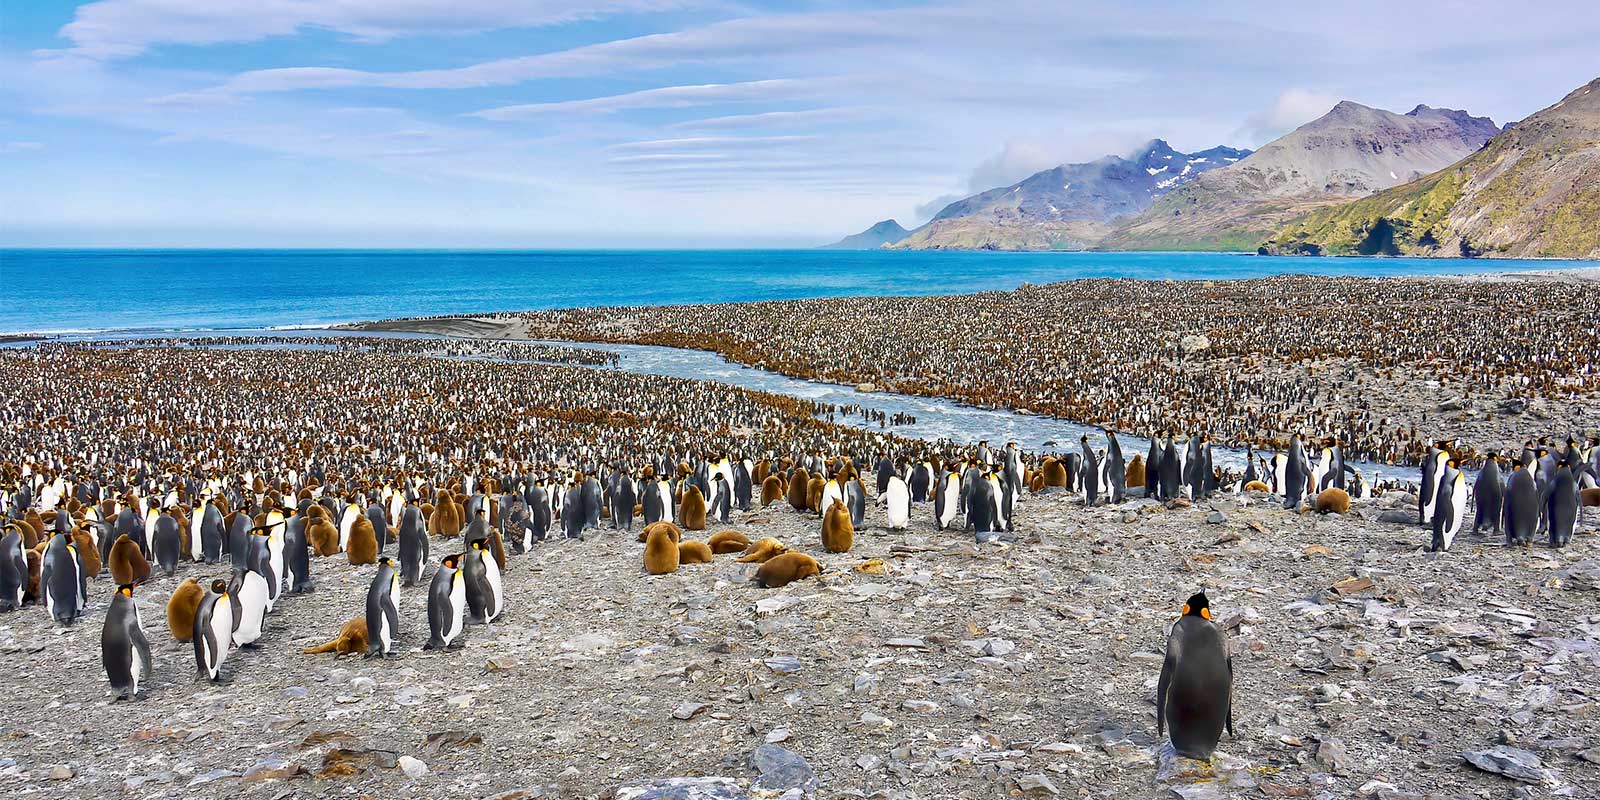 King penguins at St Andrew's Bay in Antarcica